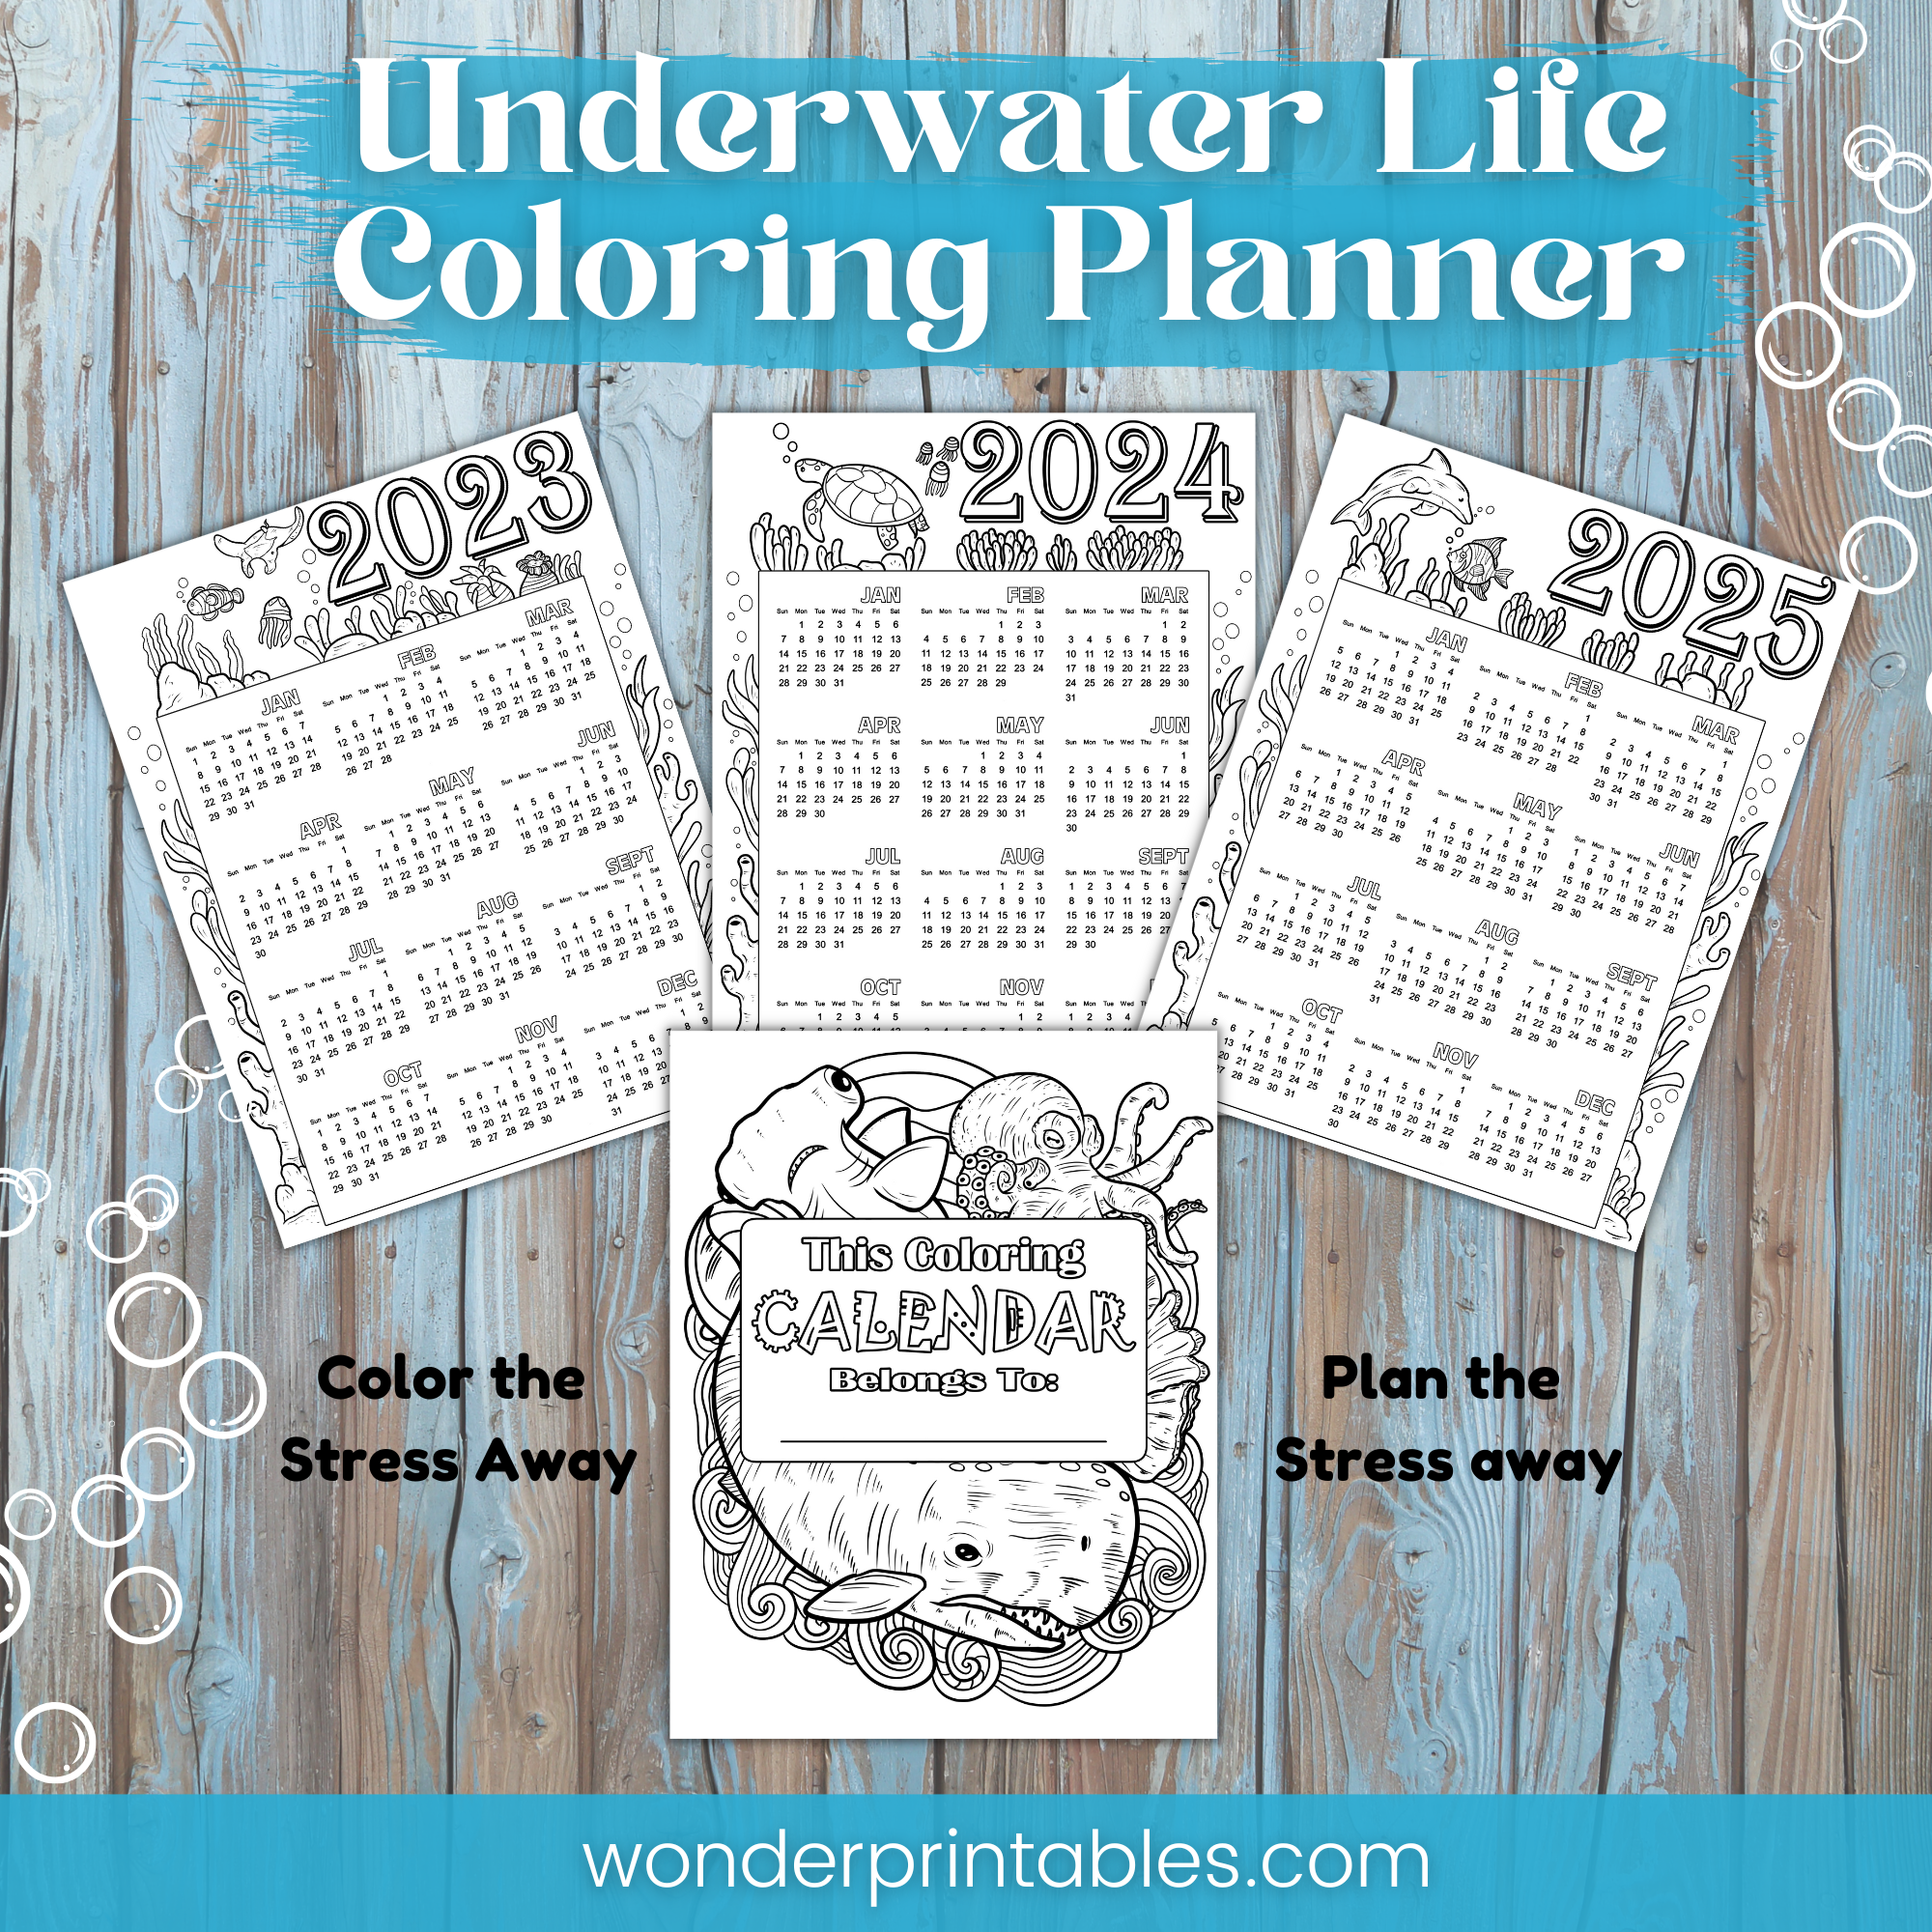 Daily Coloring Planner Printable 2024 Calendar Adult Coloring 2